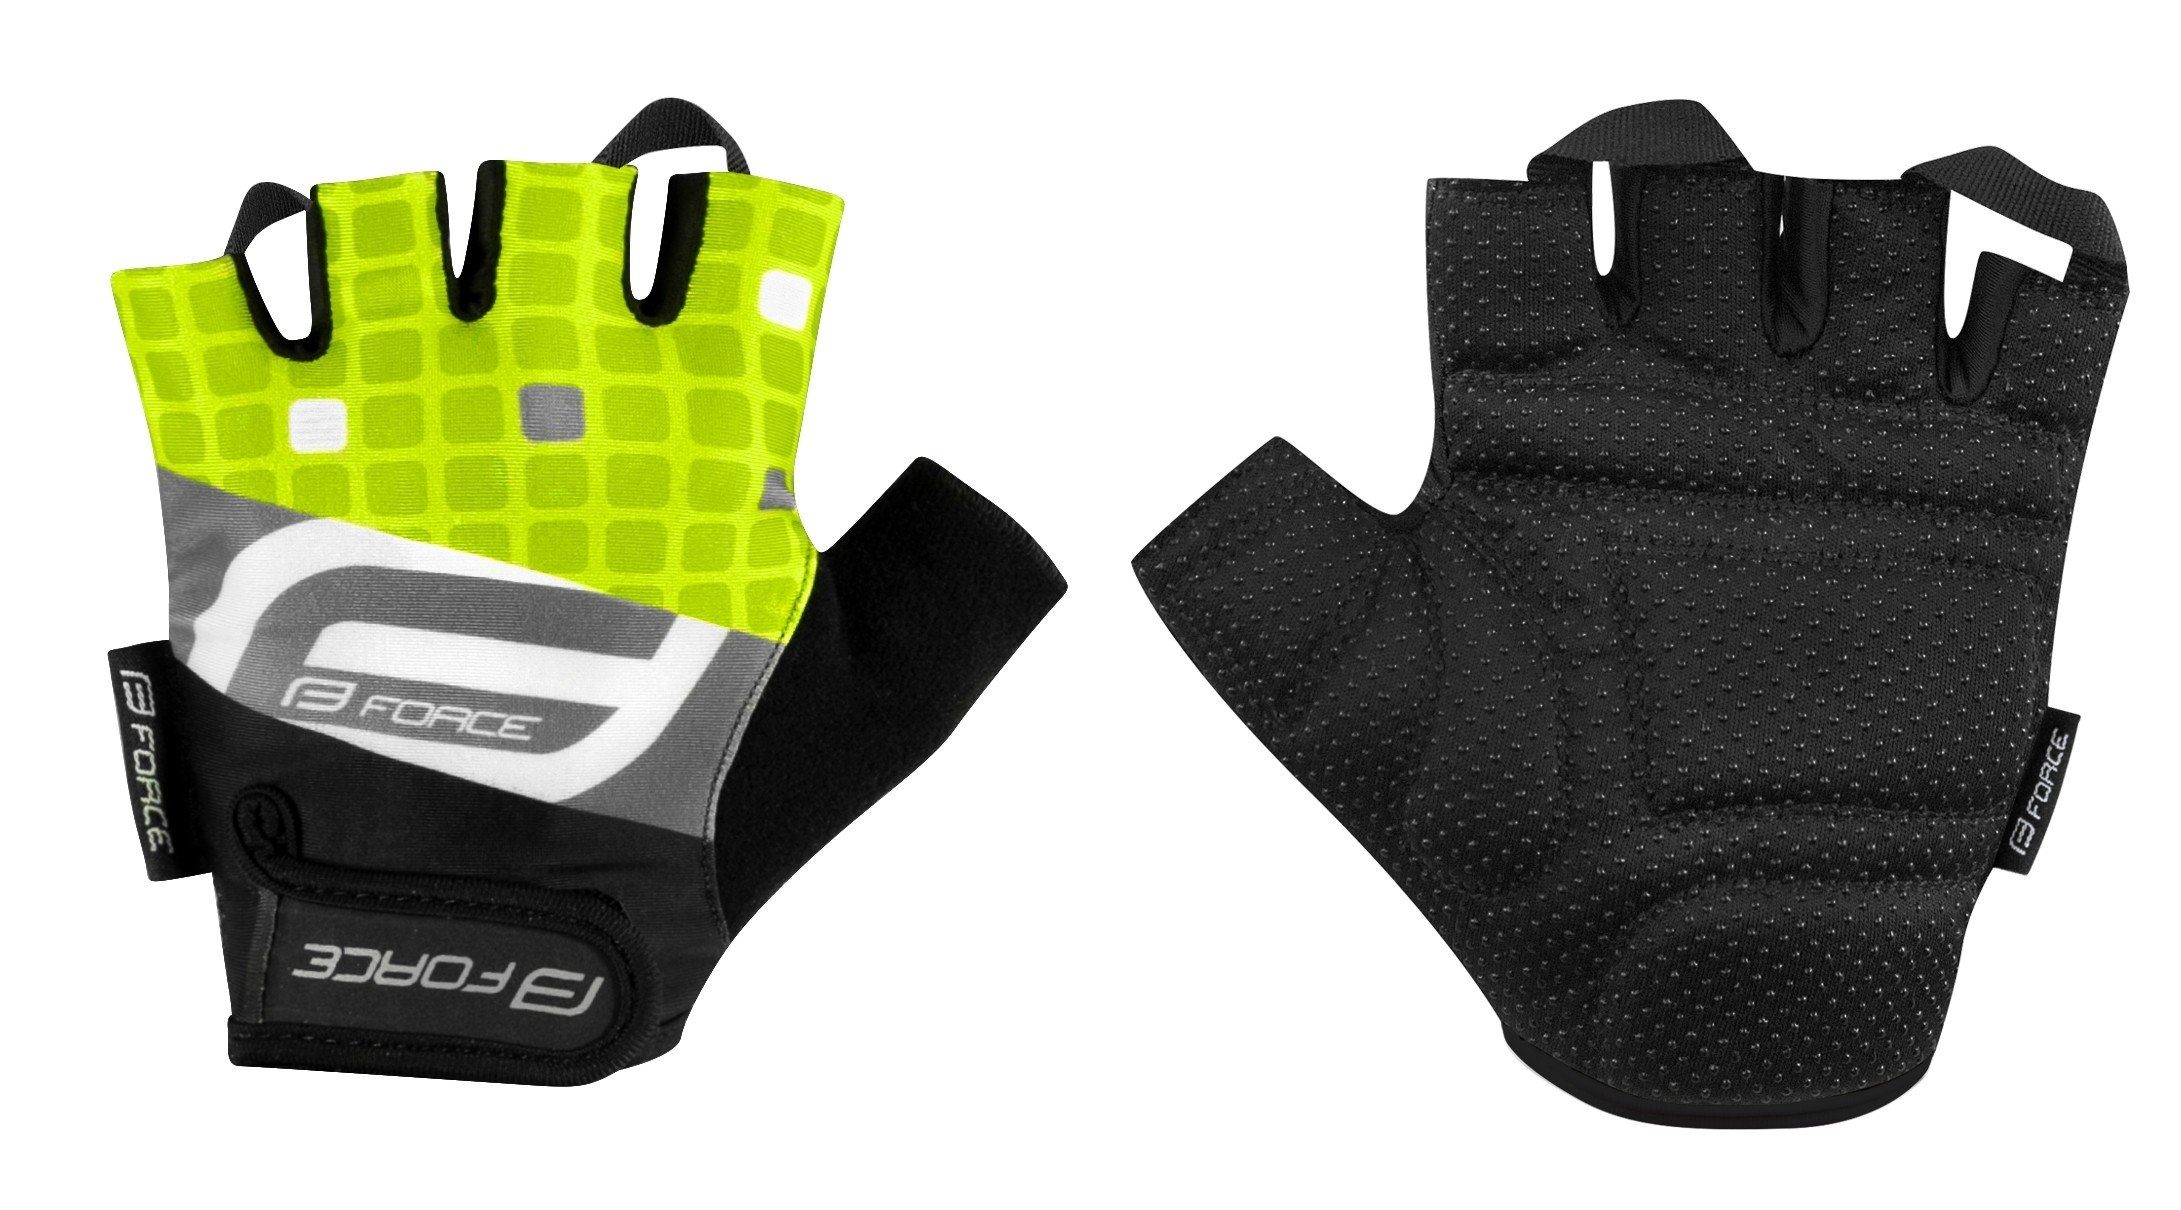 FORCE Fahrradhandschuhe Handschuhe FORCE SQUARE fluo